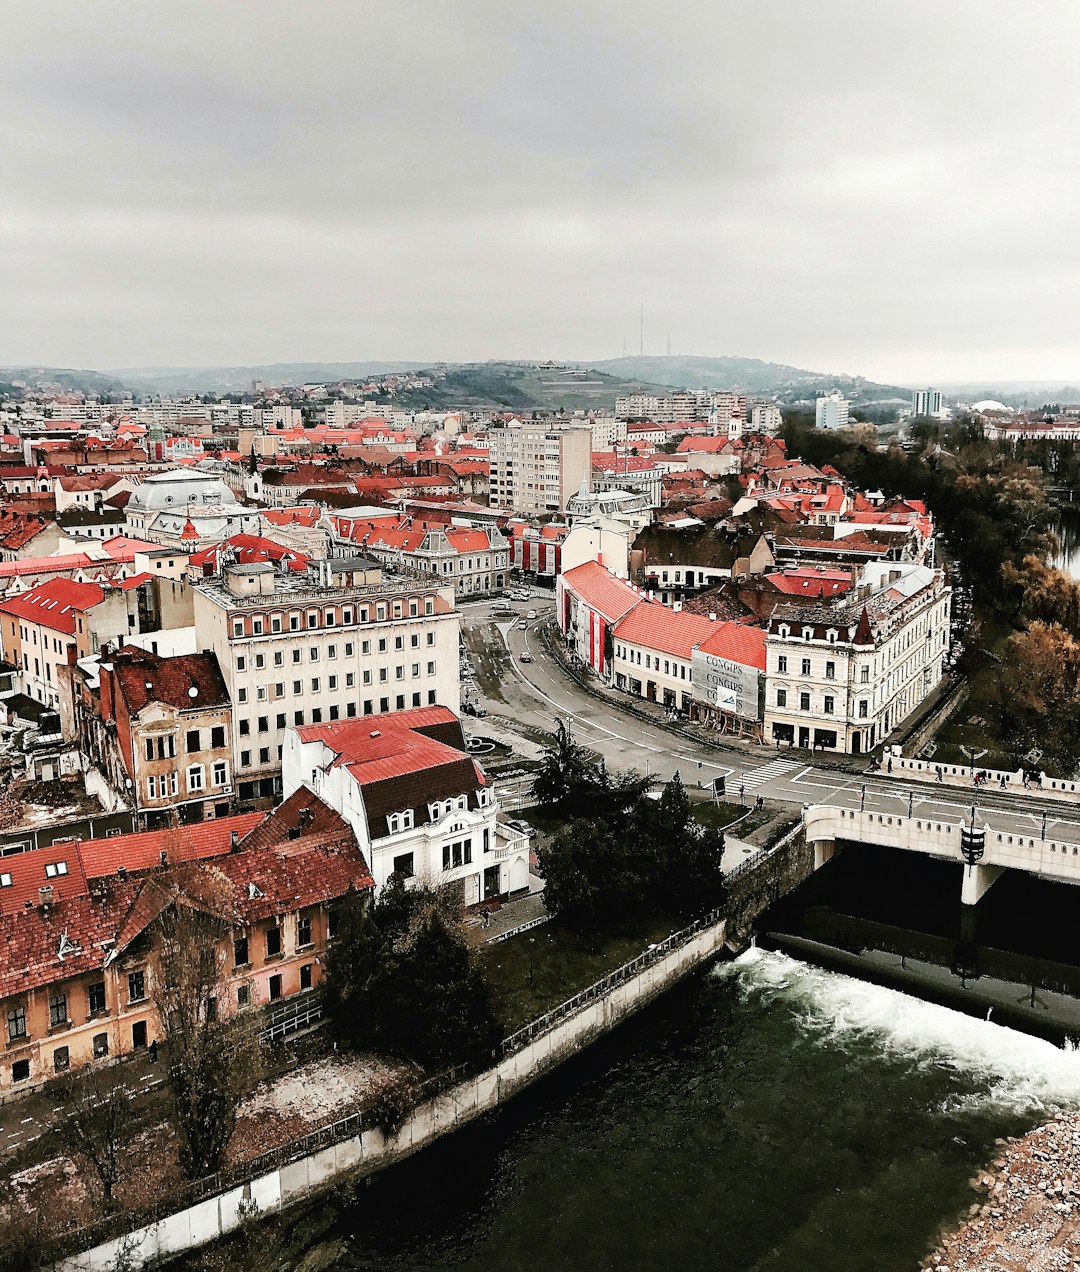 Travel Tips and Stories of Oradea in Romania